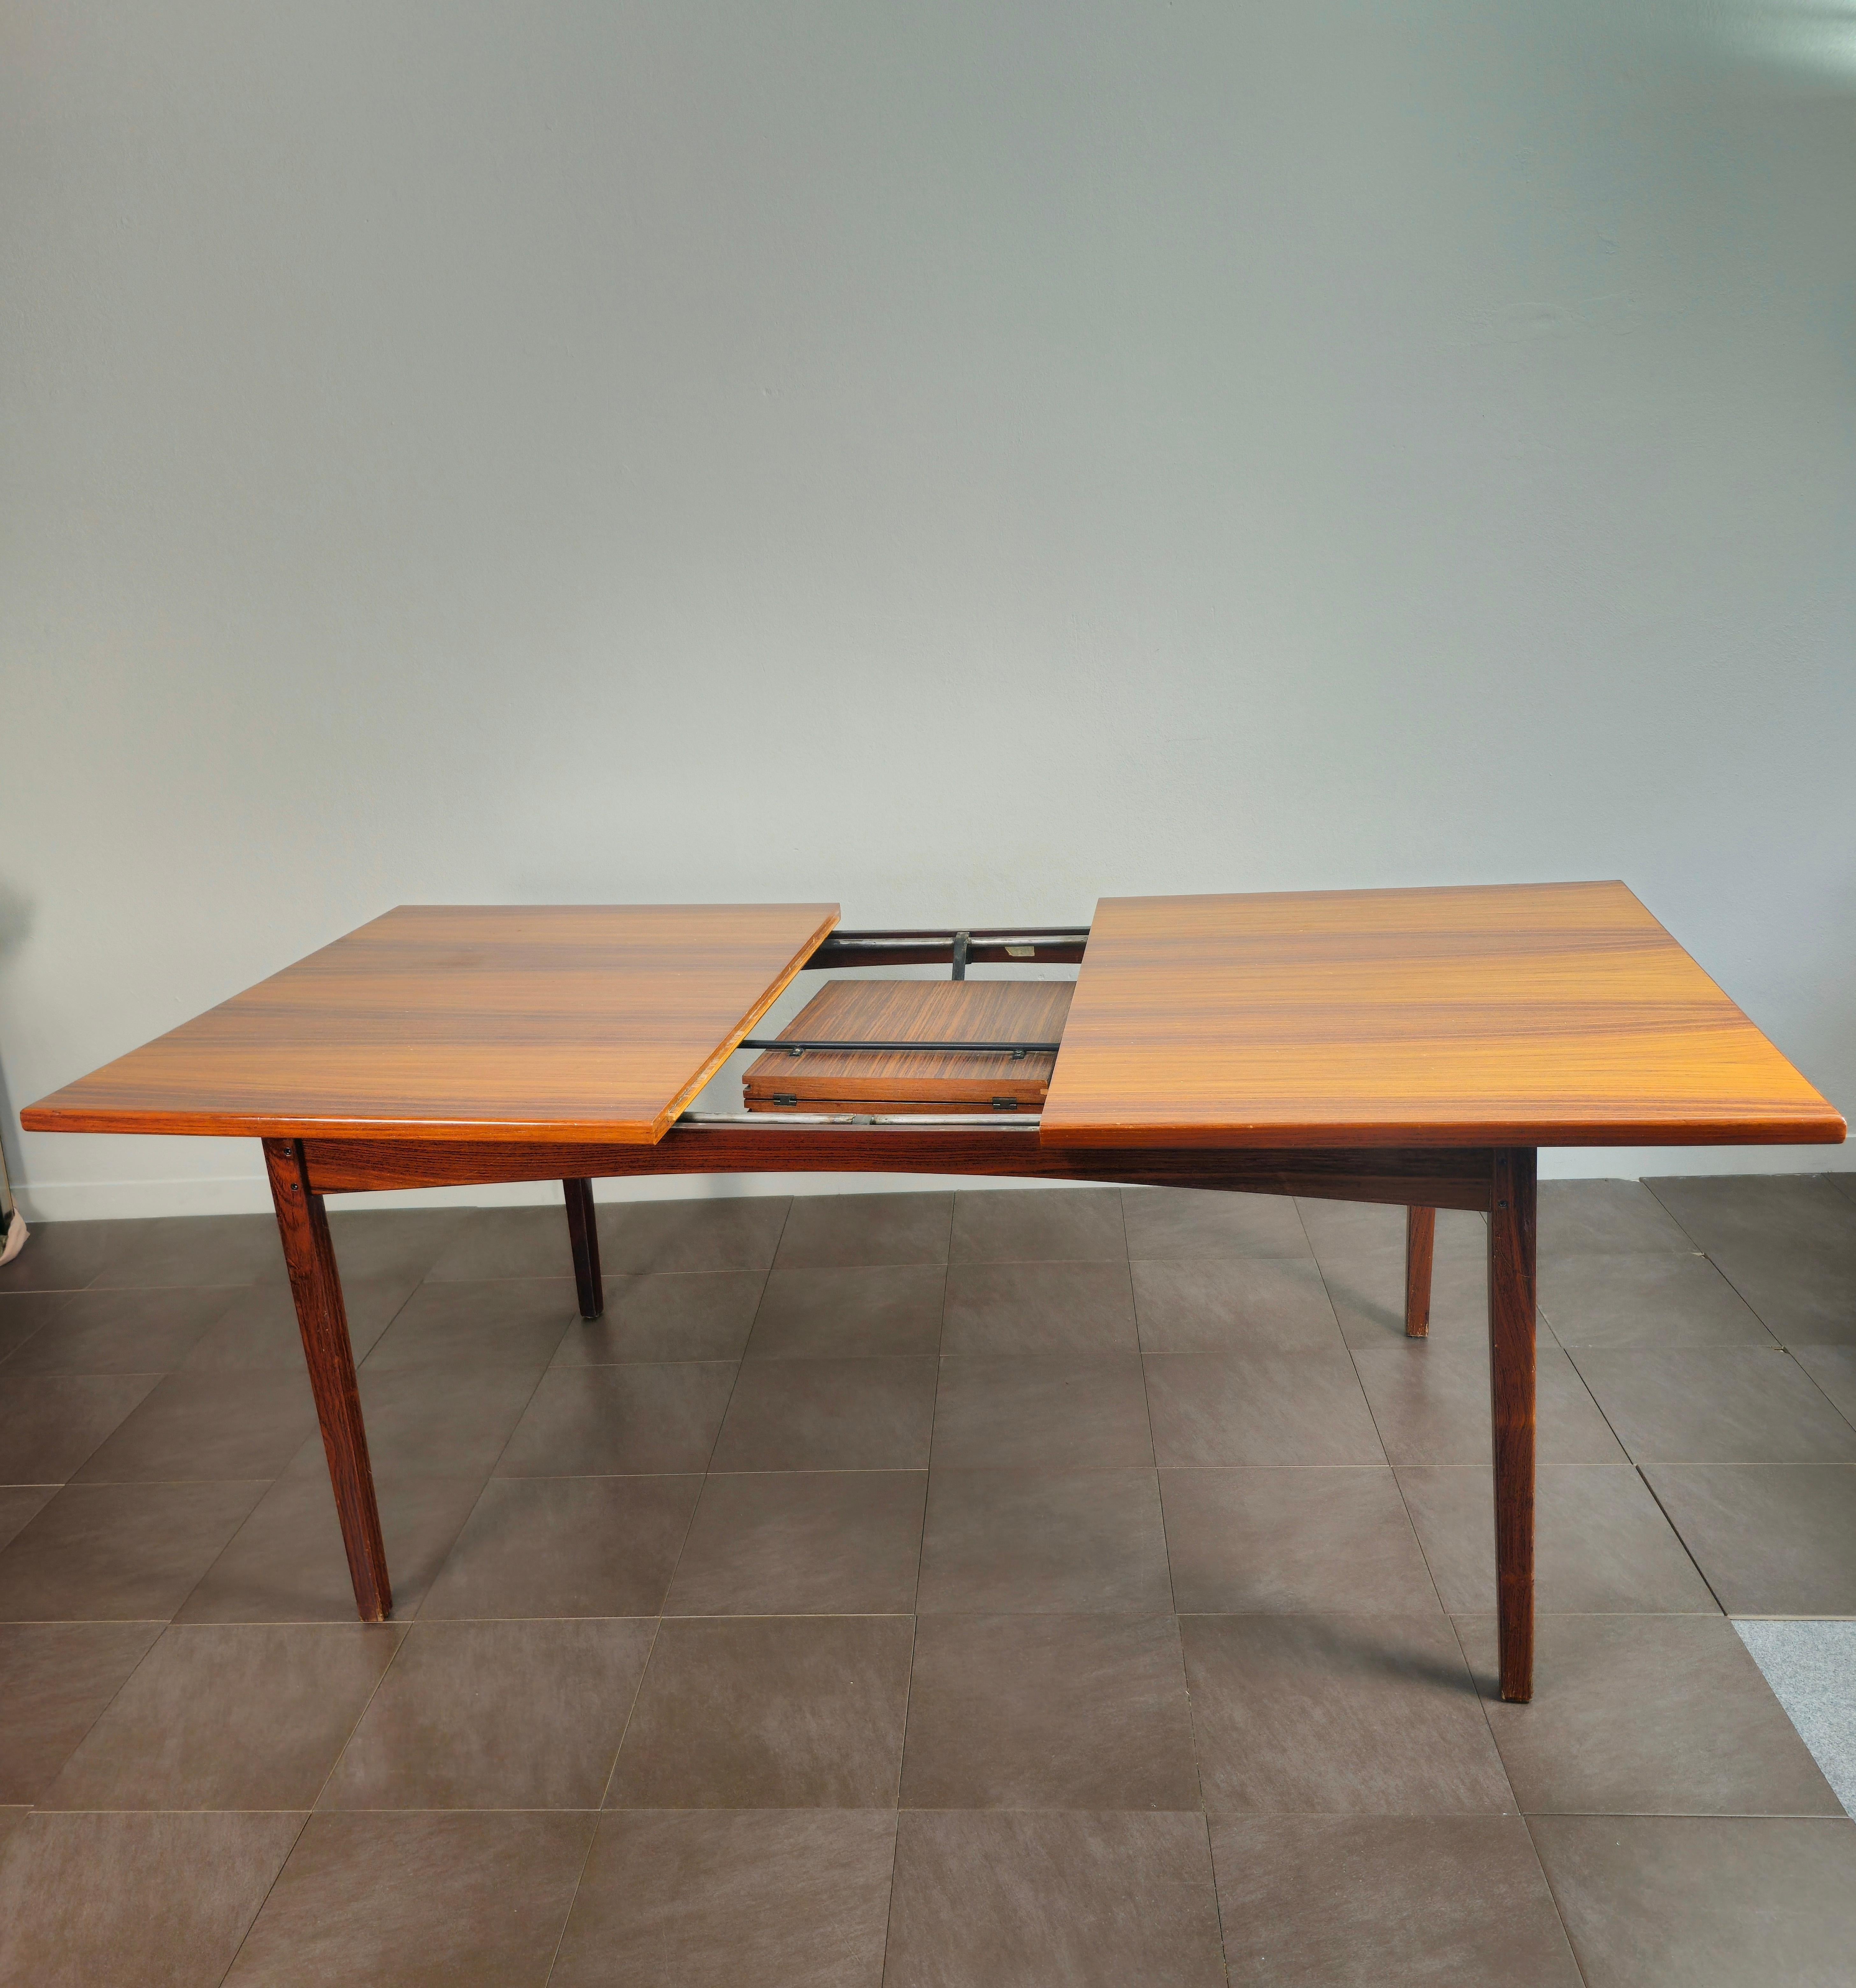 Wood Dining Room Table Extendable Large Rectangular Midcentury, Denmark, 1960s For Sale 3